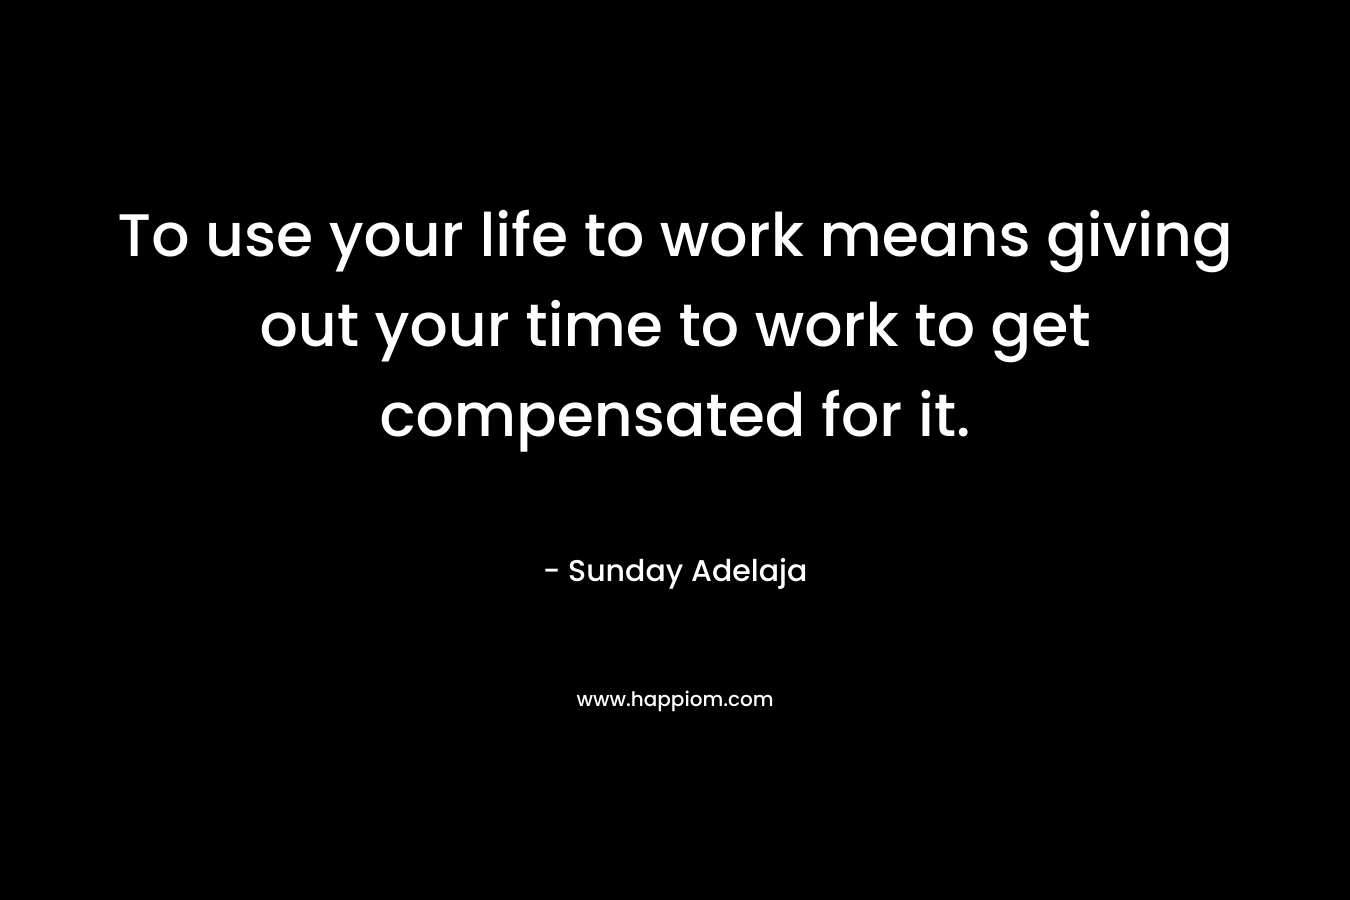 To use your life to work means giving out your time to work to get compensated for it.